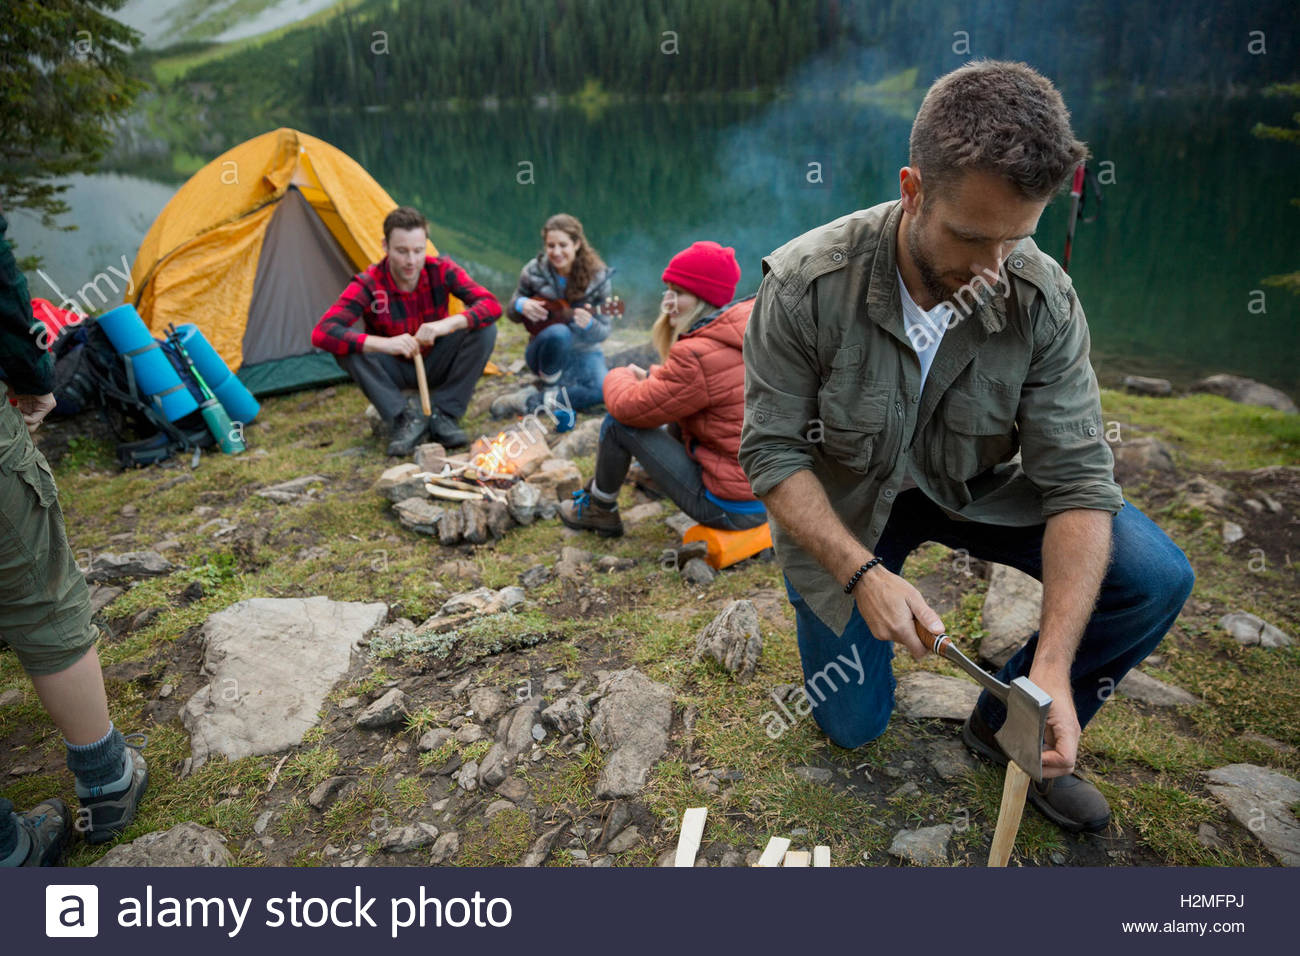 Man splitting wood with ax near campfire at lakeside campsite Stock Photo